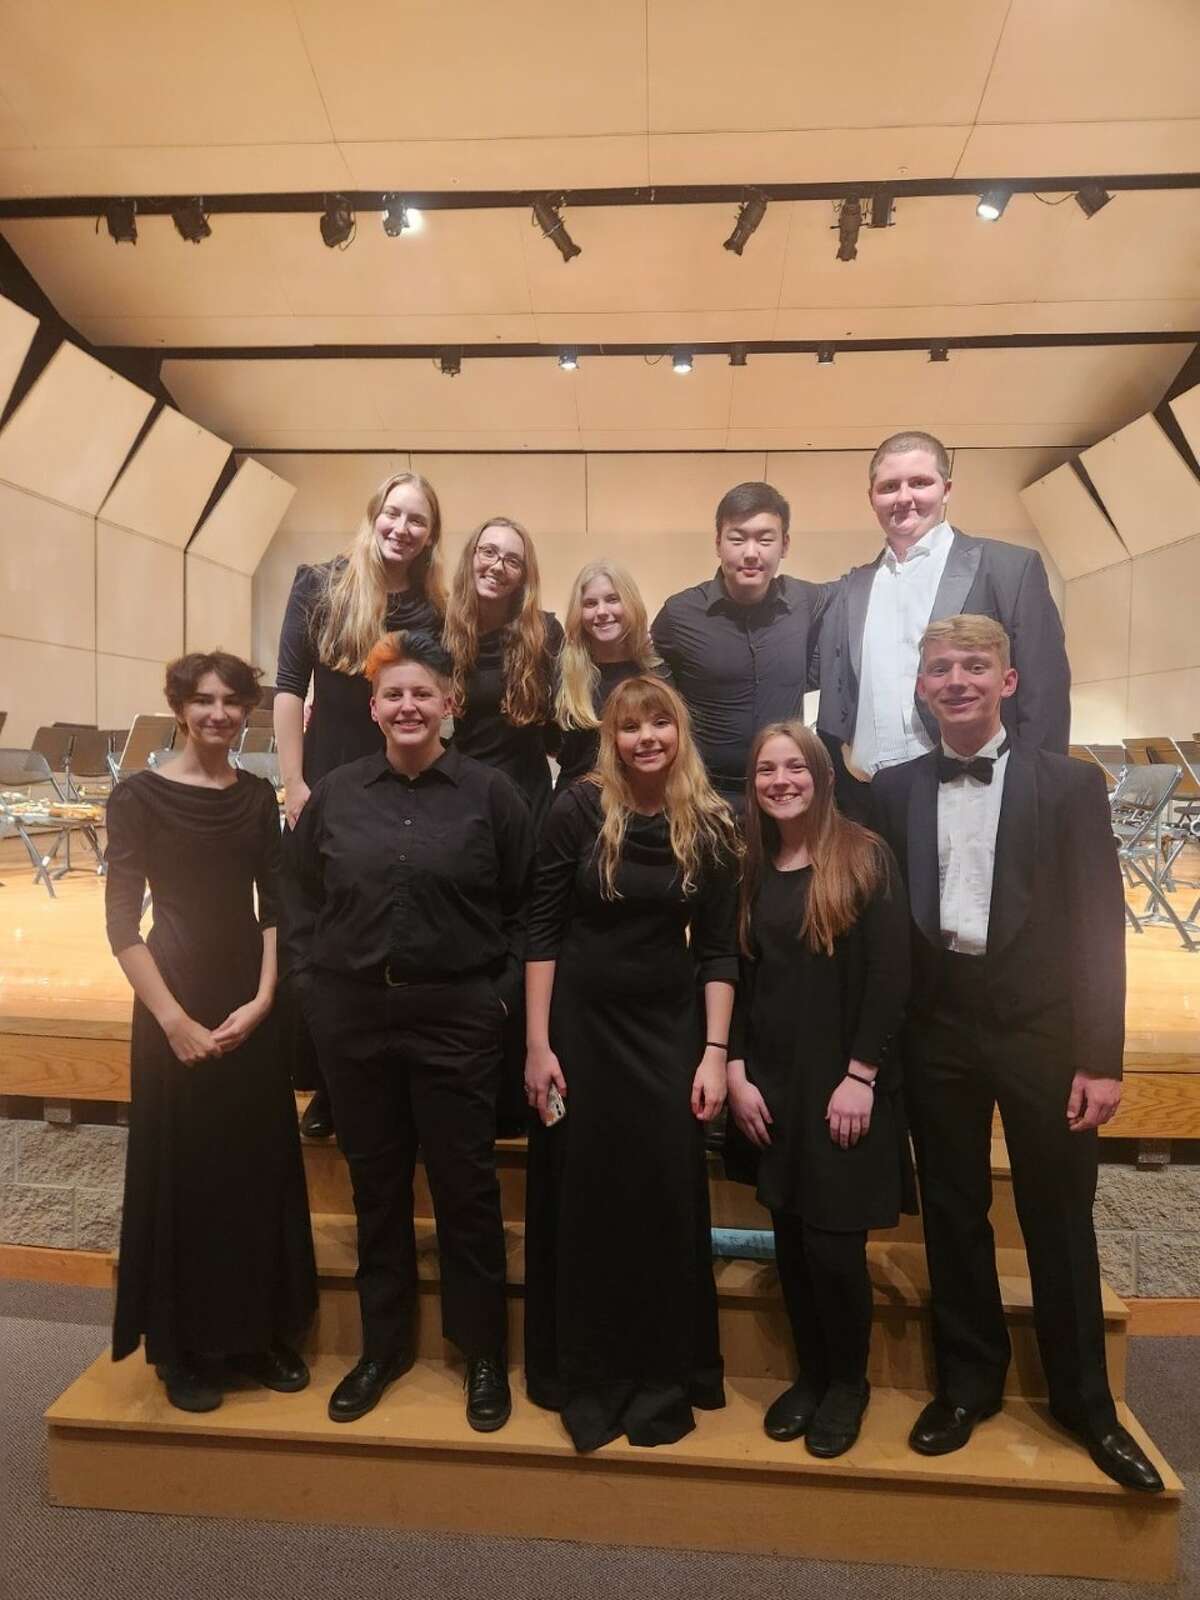 Manistee High School Band members performed in the Manistee Benzie Honor Band concert on Nov. 10. Pictured (front row, left to right) are Hanna Konen, Jazlyn Madsen, Marina Reid, Gabby Senters, Luke Senters, (back row) Emily Sullivan, Avery Vaas, Sarah Huber, Vincent Wang and Buddy Goodspeed.